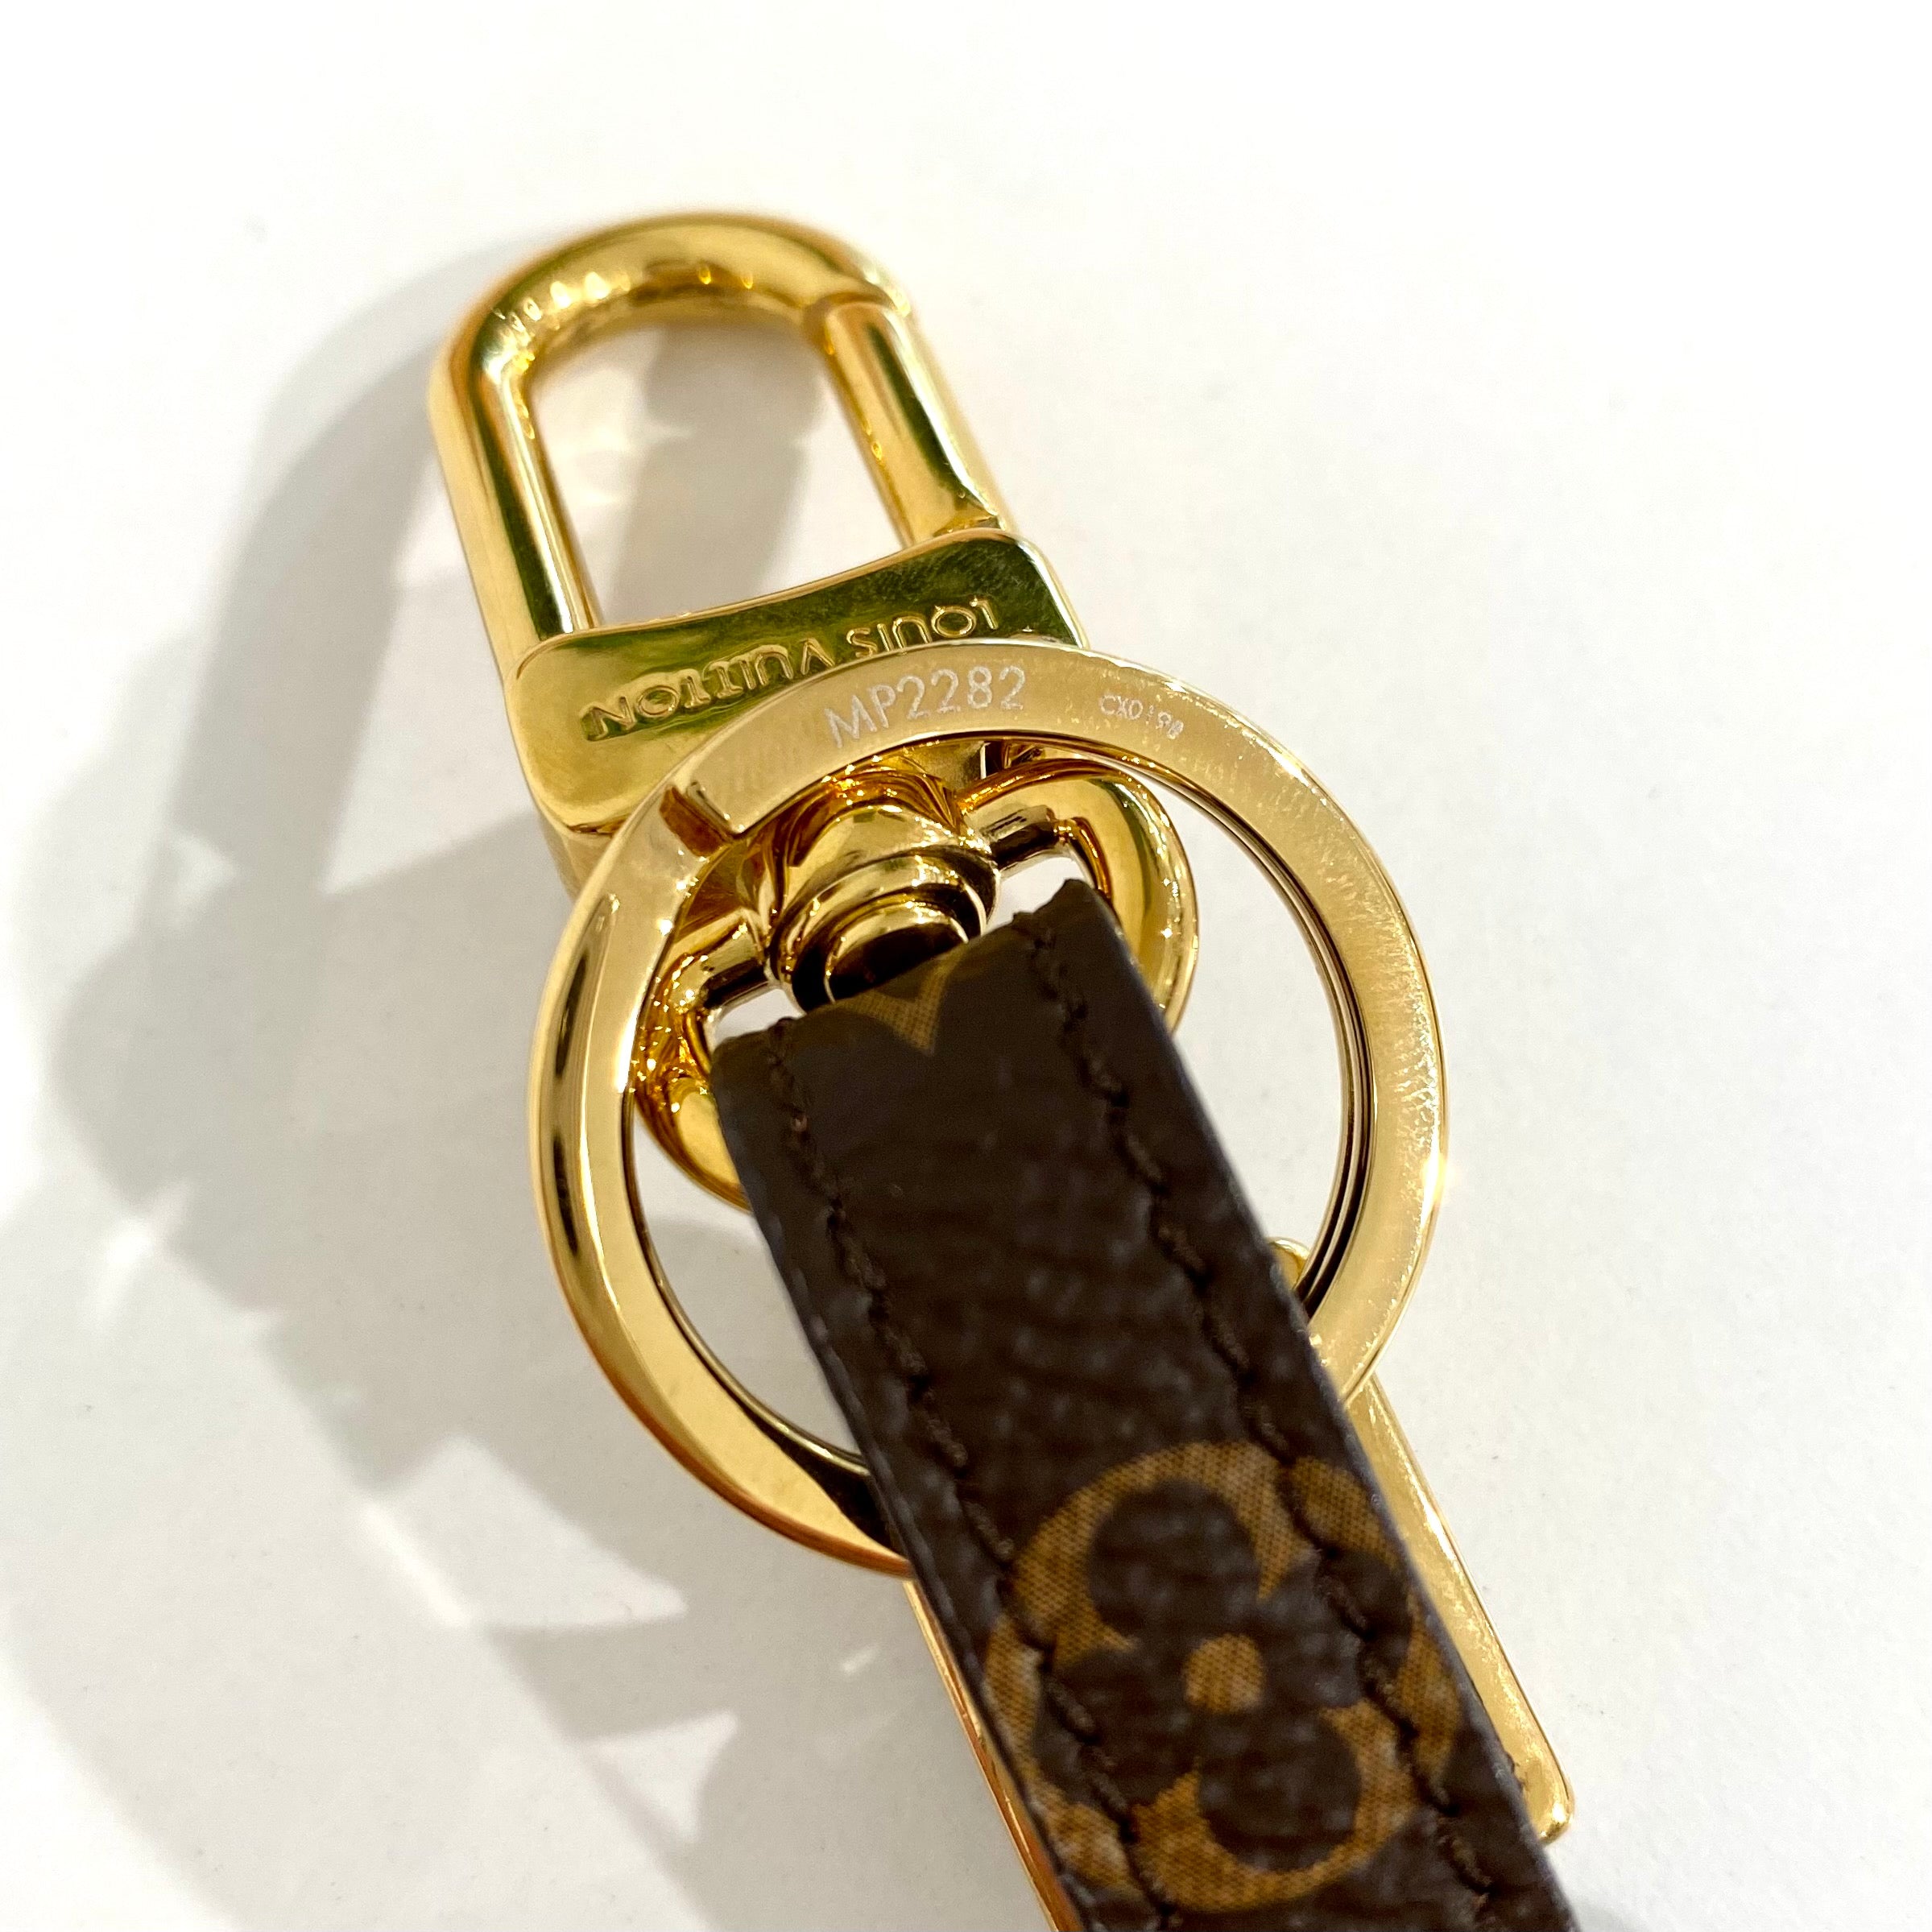 Louis Vuitton Tassel Keychain – Dina C's Fab and Funky Consignment Boutique